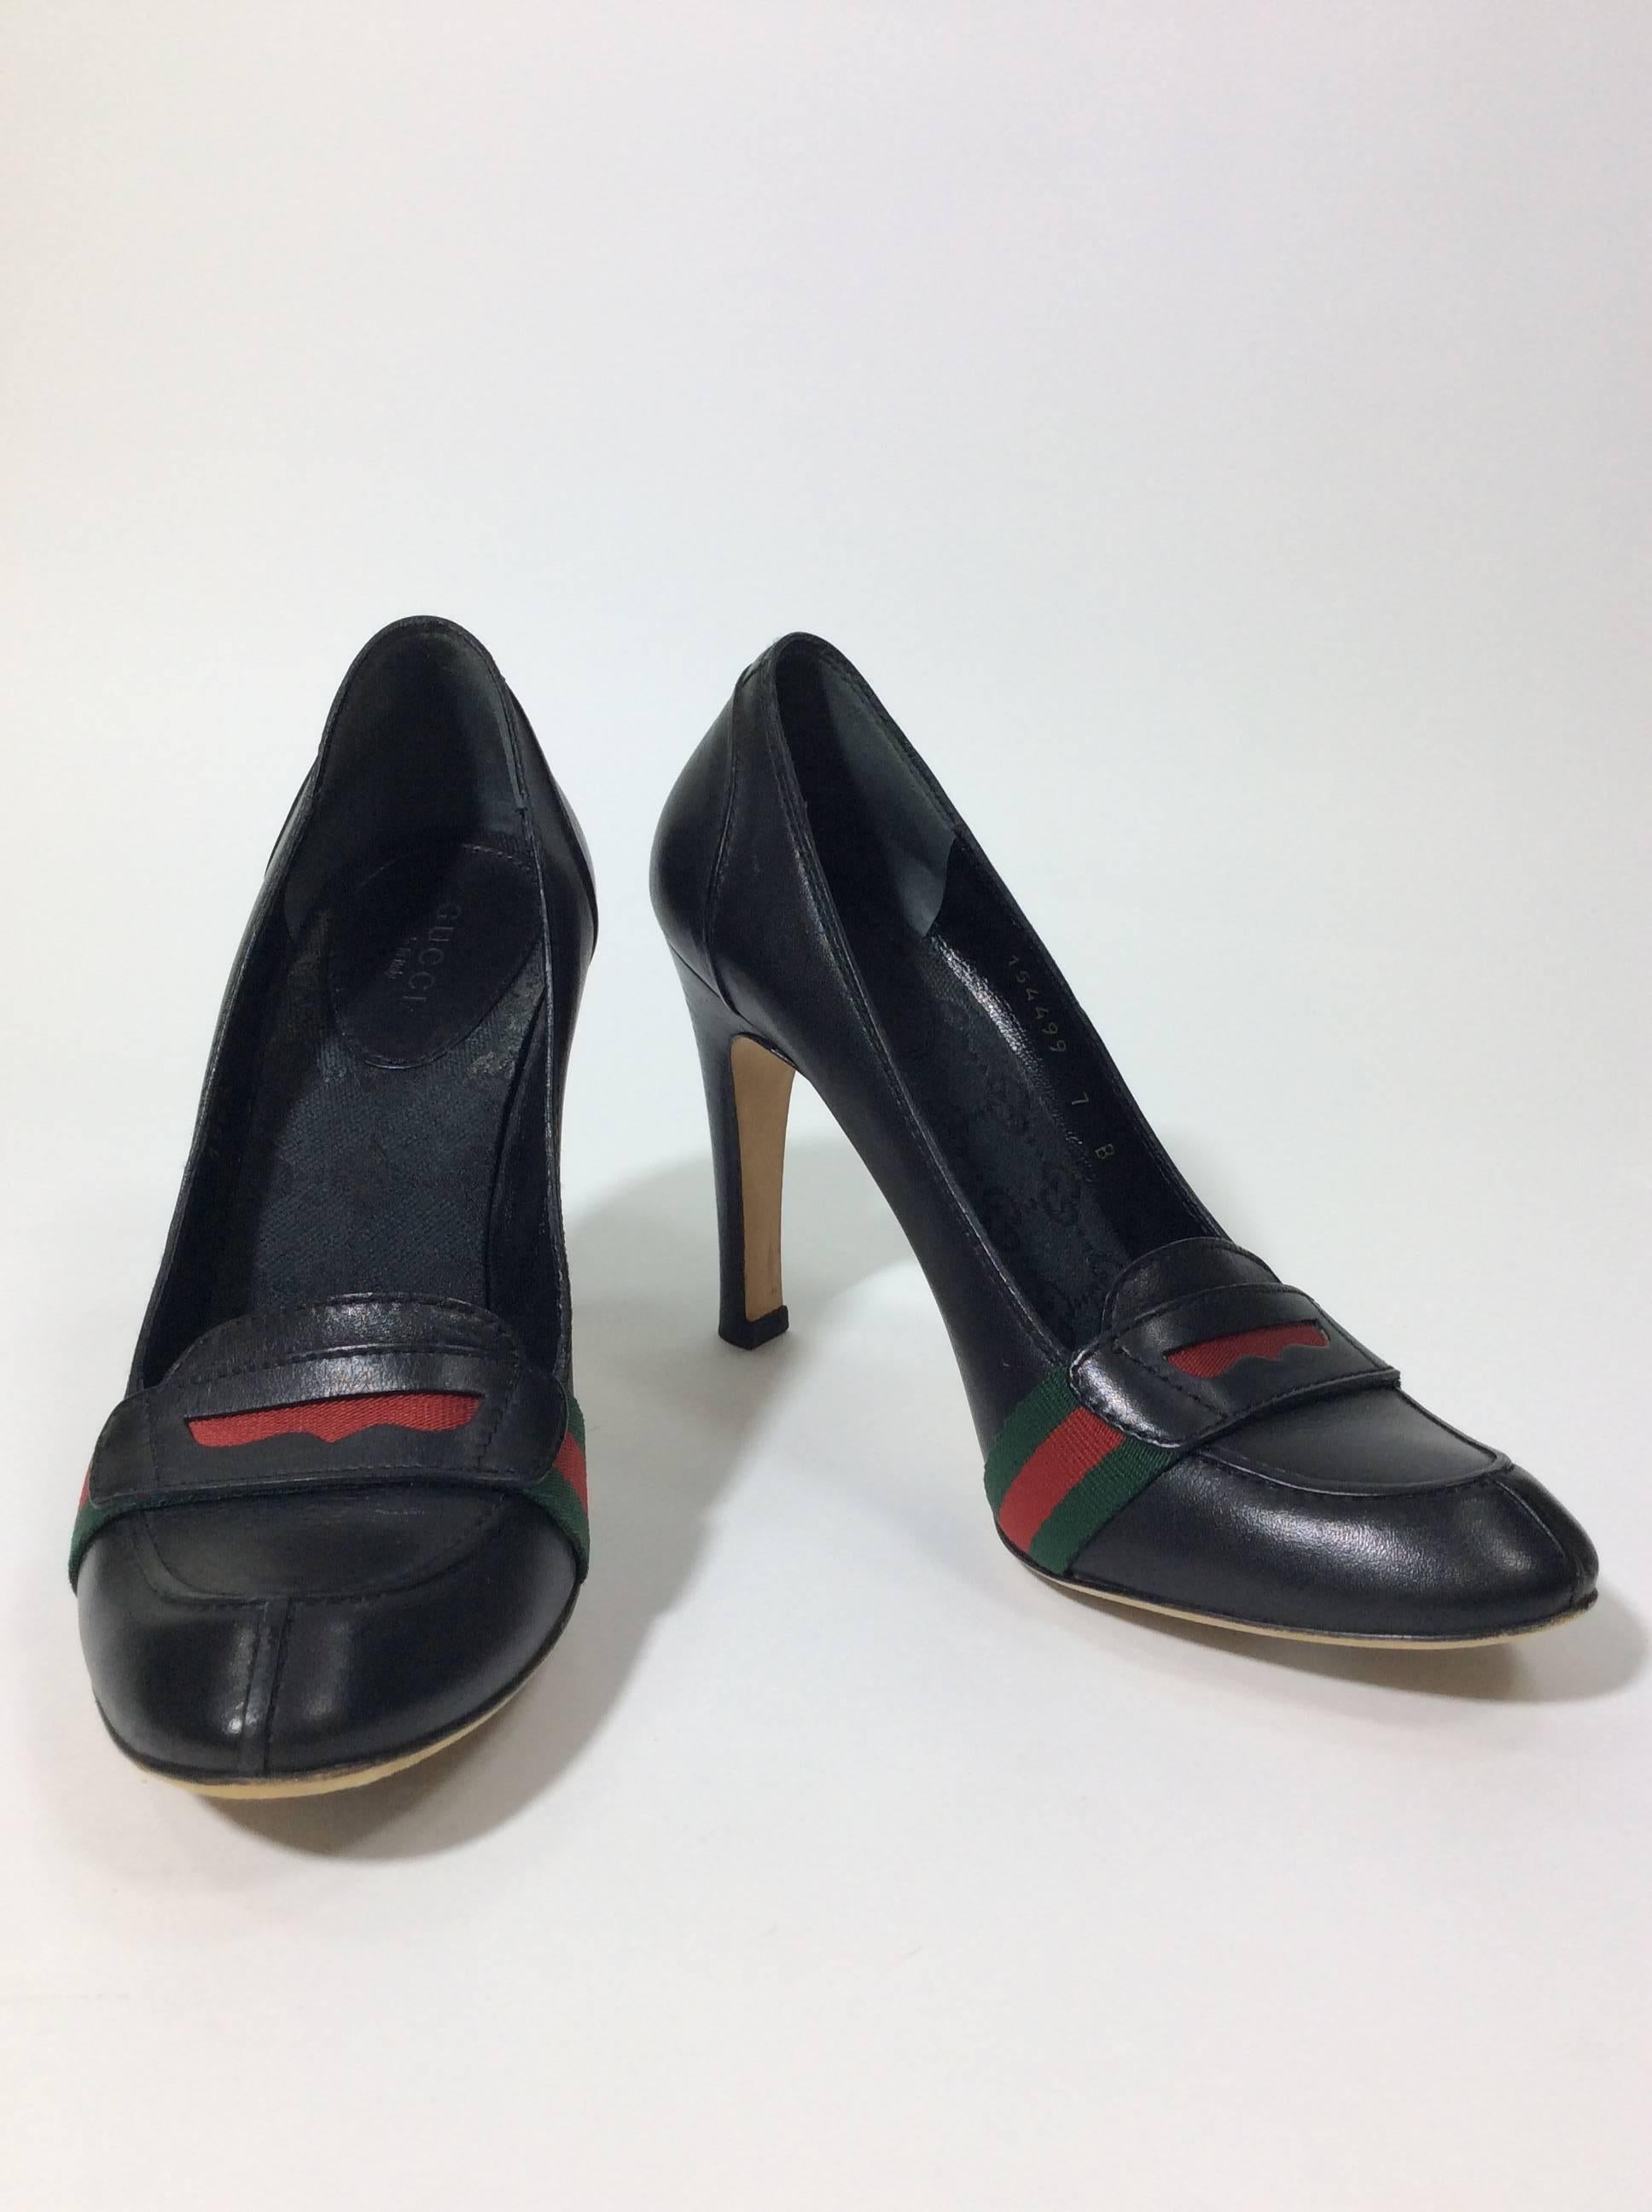 Black Leather Pump
Signature Gucci Green and Red Pump
4" Inch Heel
3" Inch Sole Width
Rounded Toe
Size 7B
